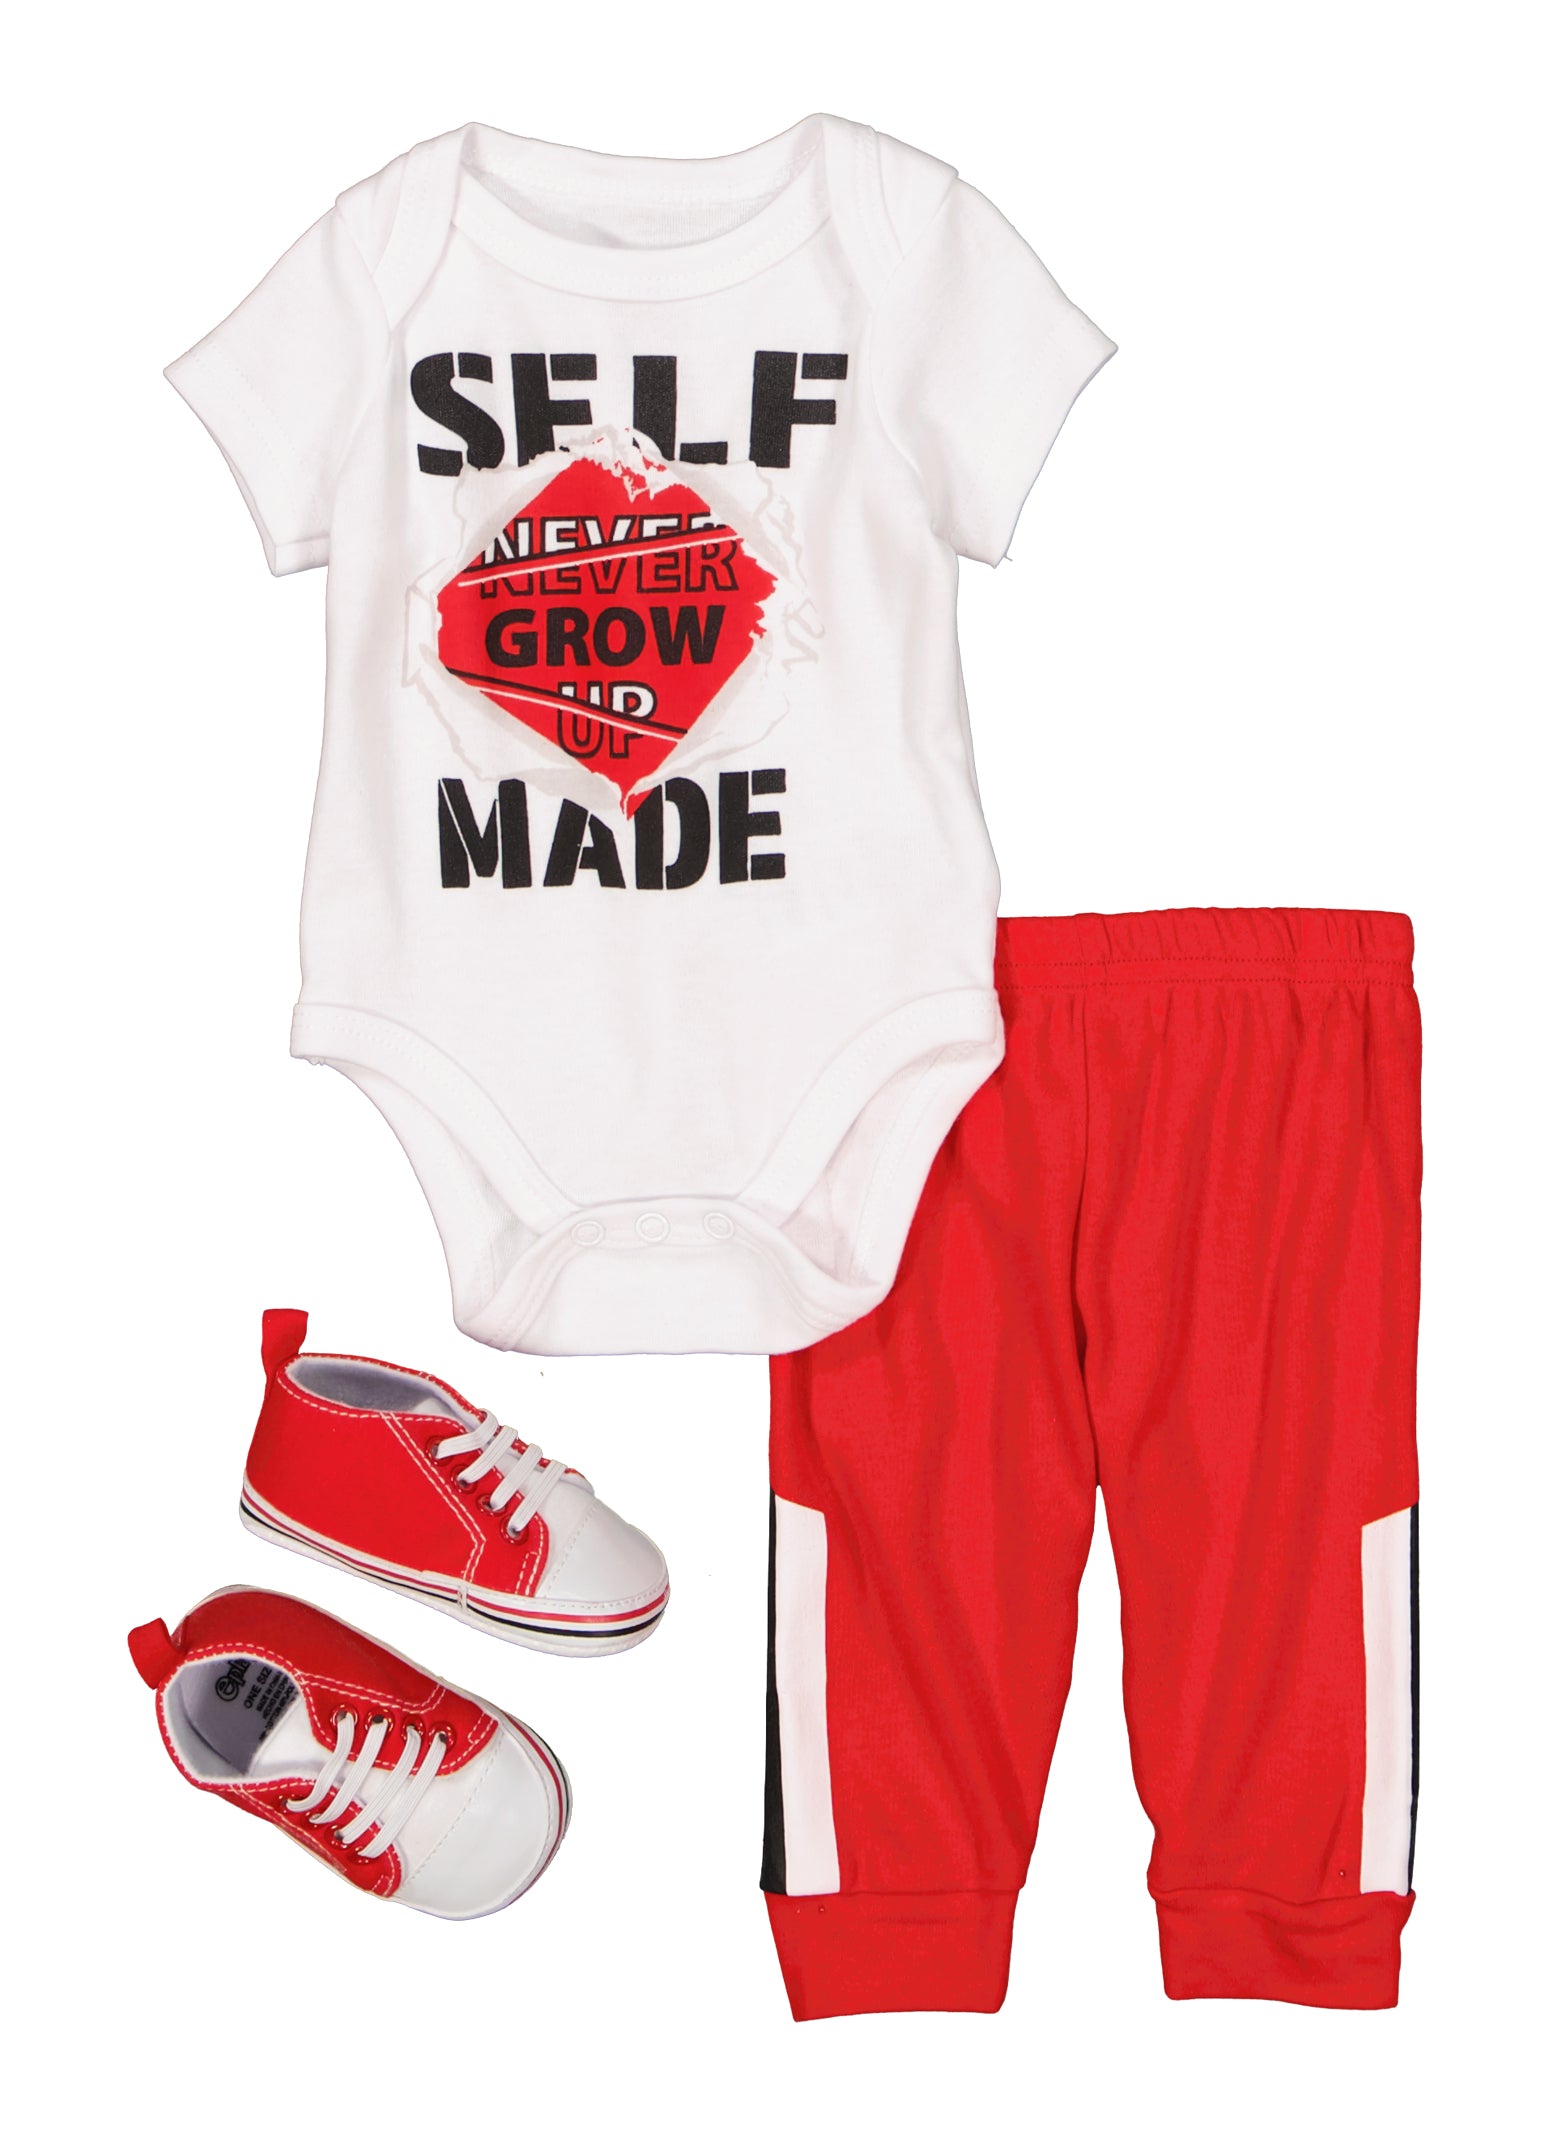 Baby Boys 0-9M Self Made Bodysuit and Joggers with Shoes, Multi, Size 0-3M